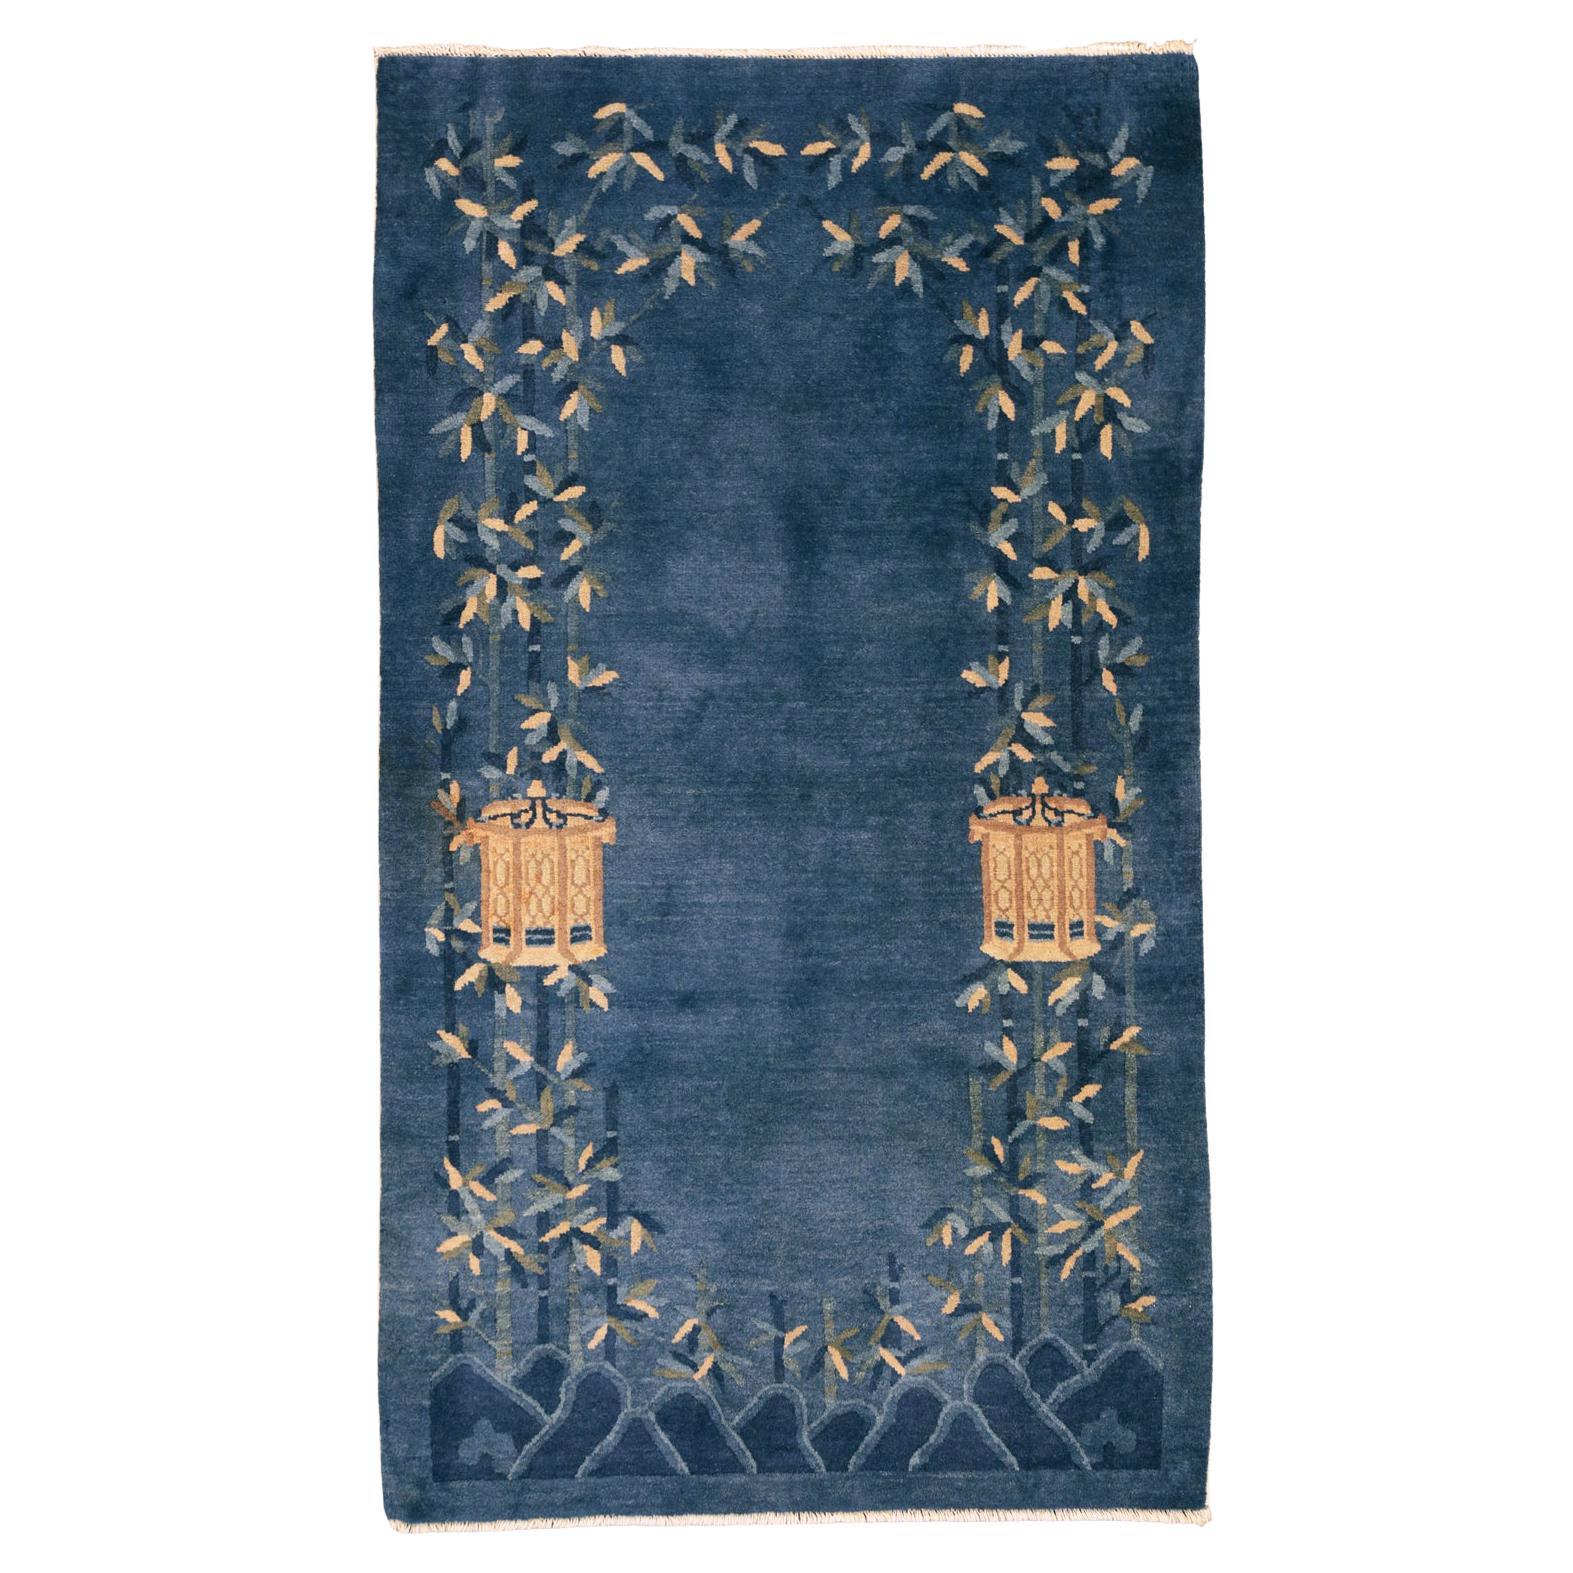 Antique Chinese Blossoming Bamboos and Lanterns Design Peking Rug, 1900-1920 For Sale